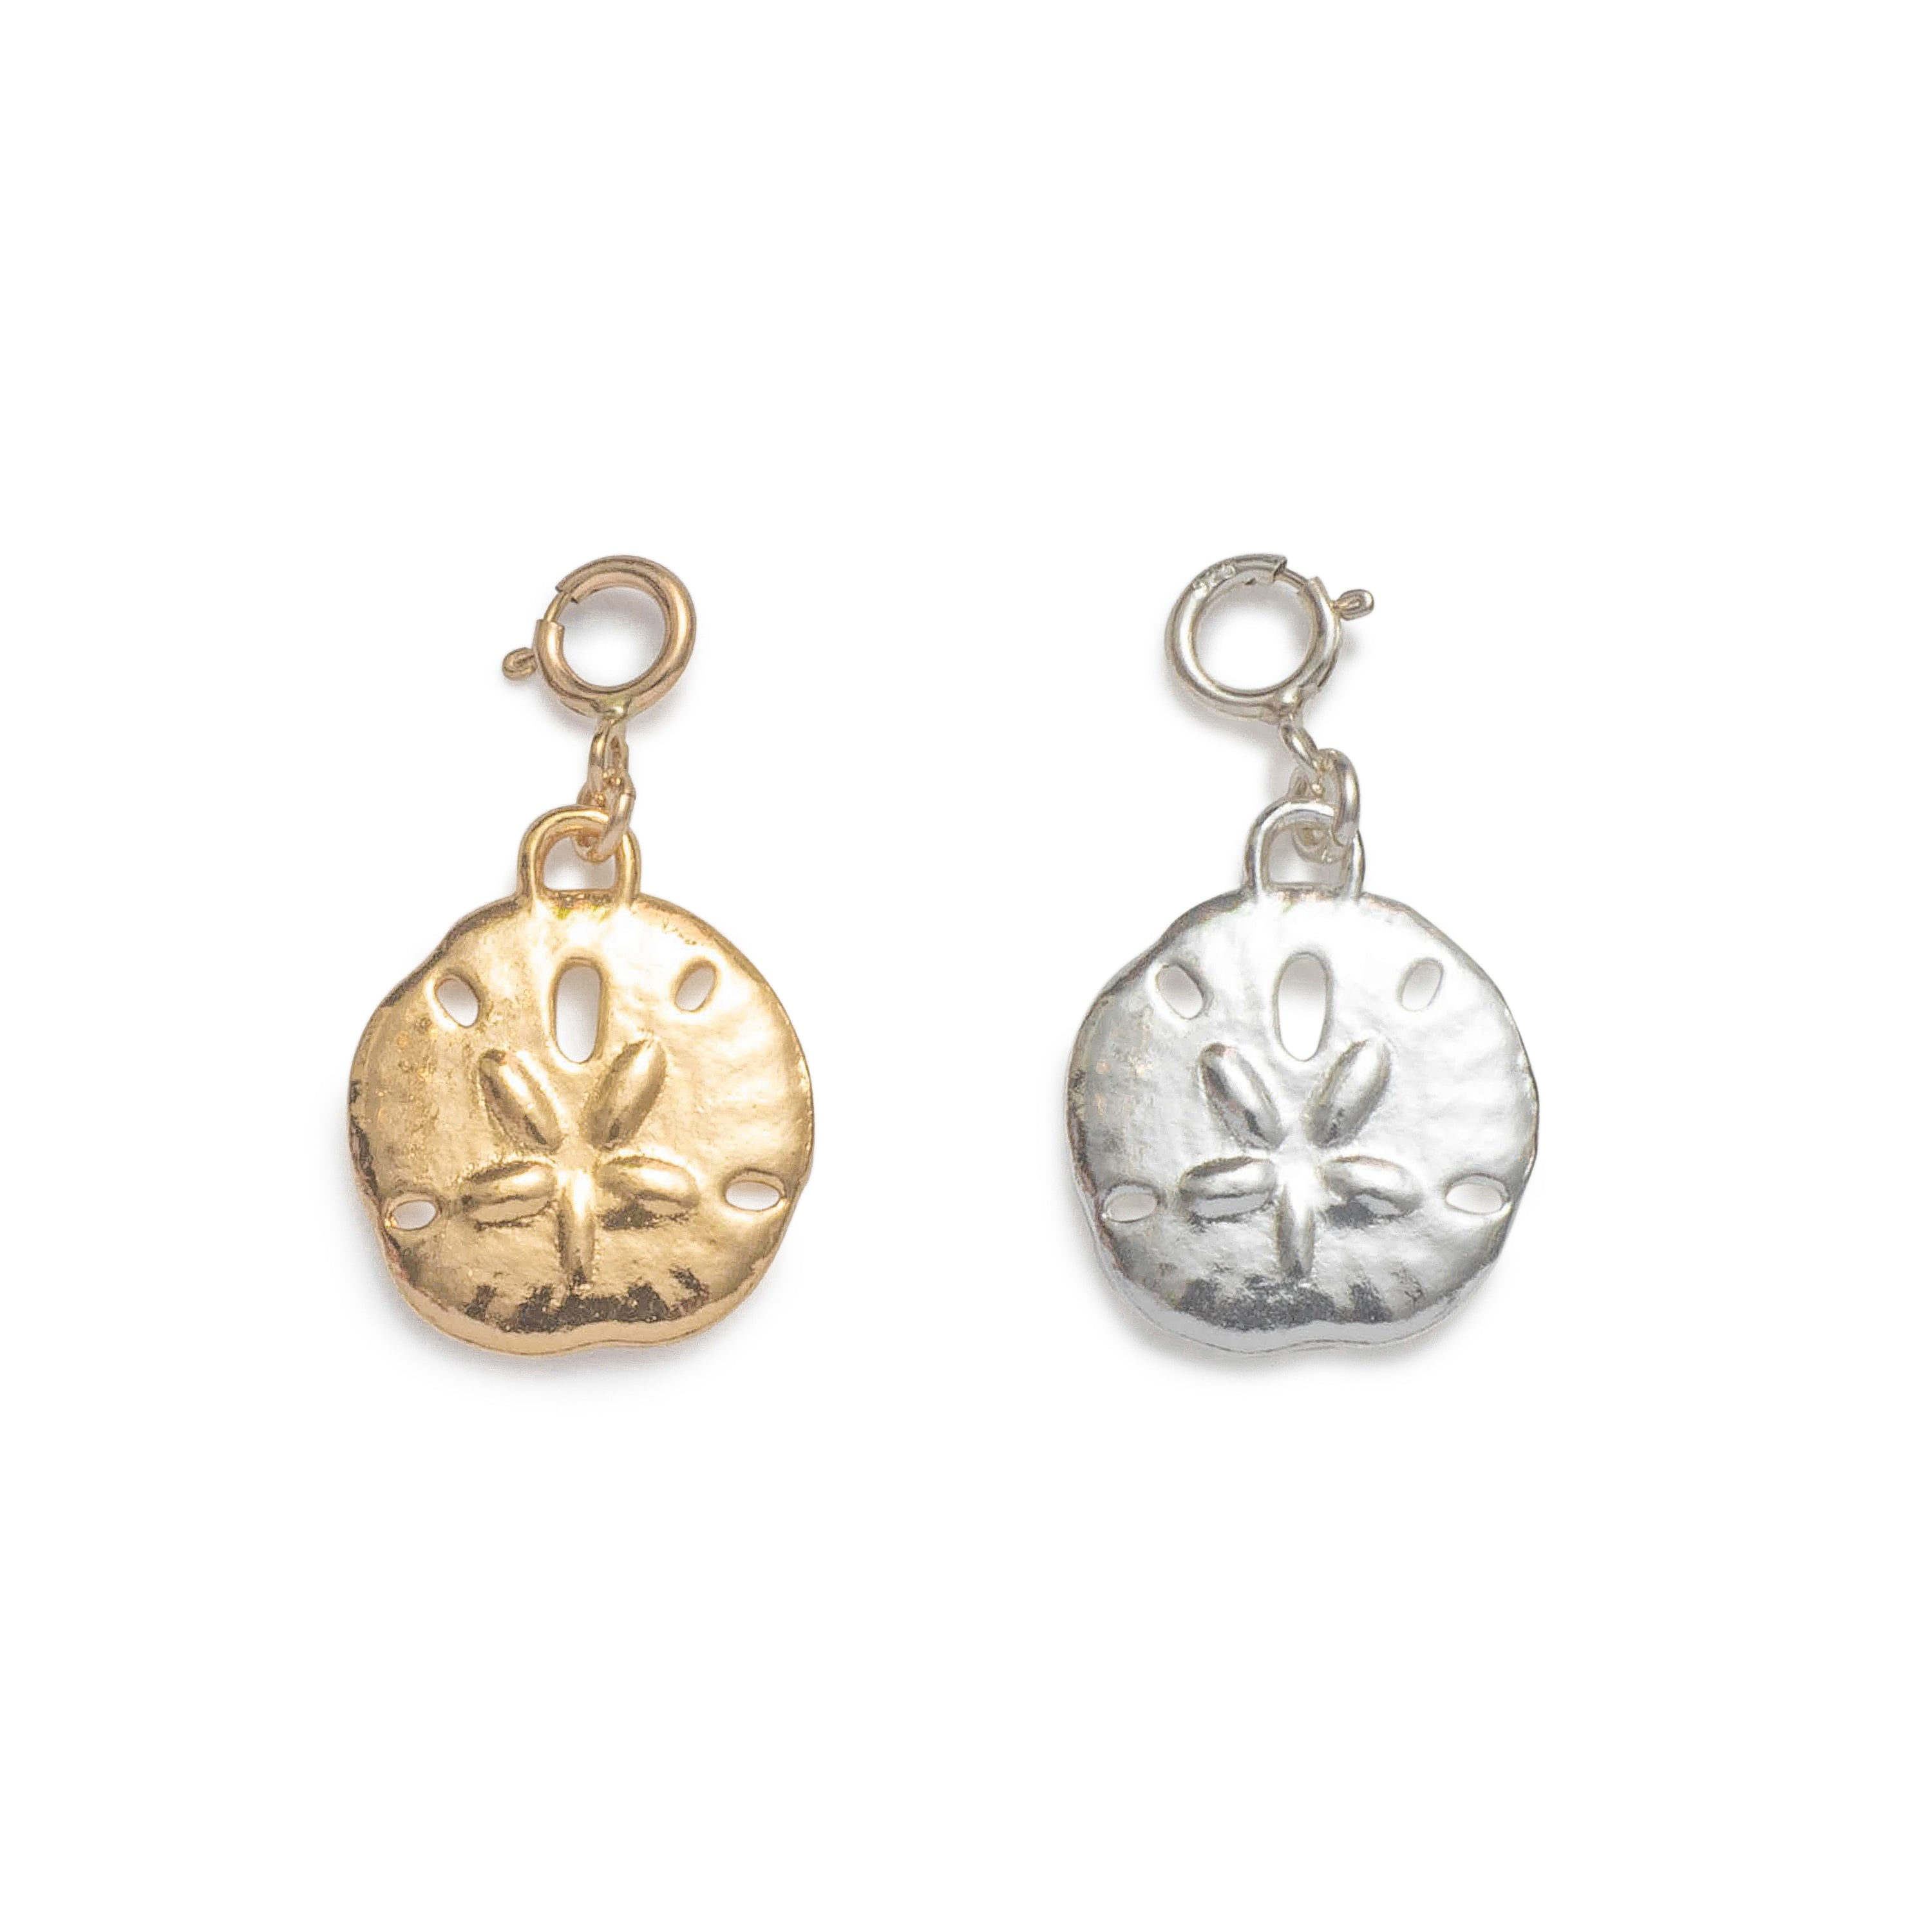 Sand Dollar Charm - Women's Charm in Sterling Silver or 14kt Gold Vermeil